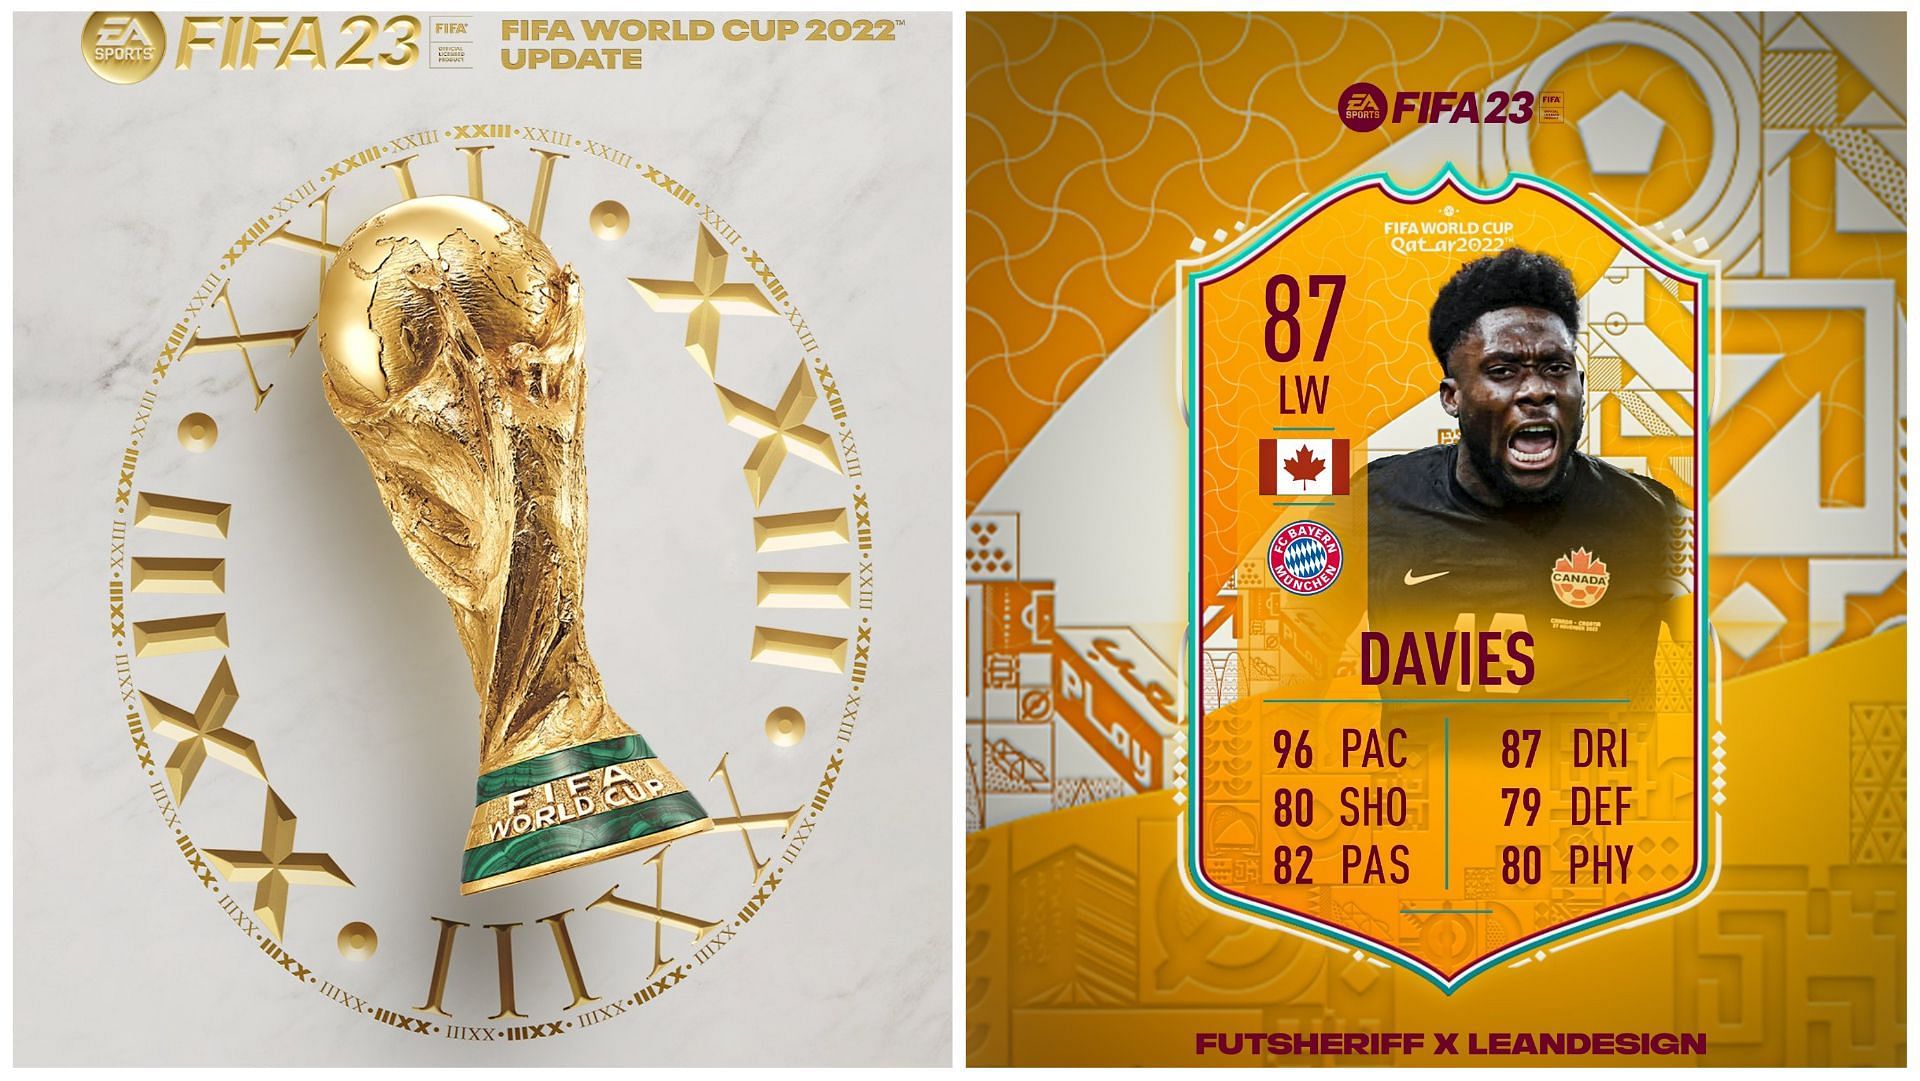 Alphonso Davies is rumored to receive a special card in FIFA 23 (Images via EA Sports and Twitter/FUT Sheriff)